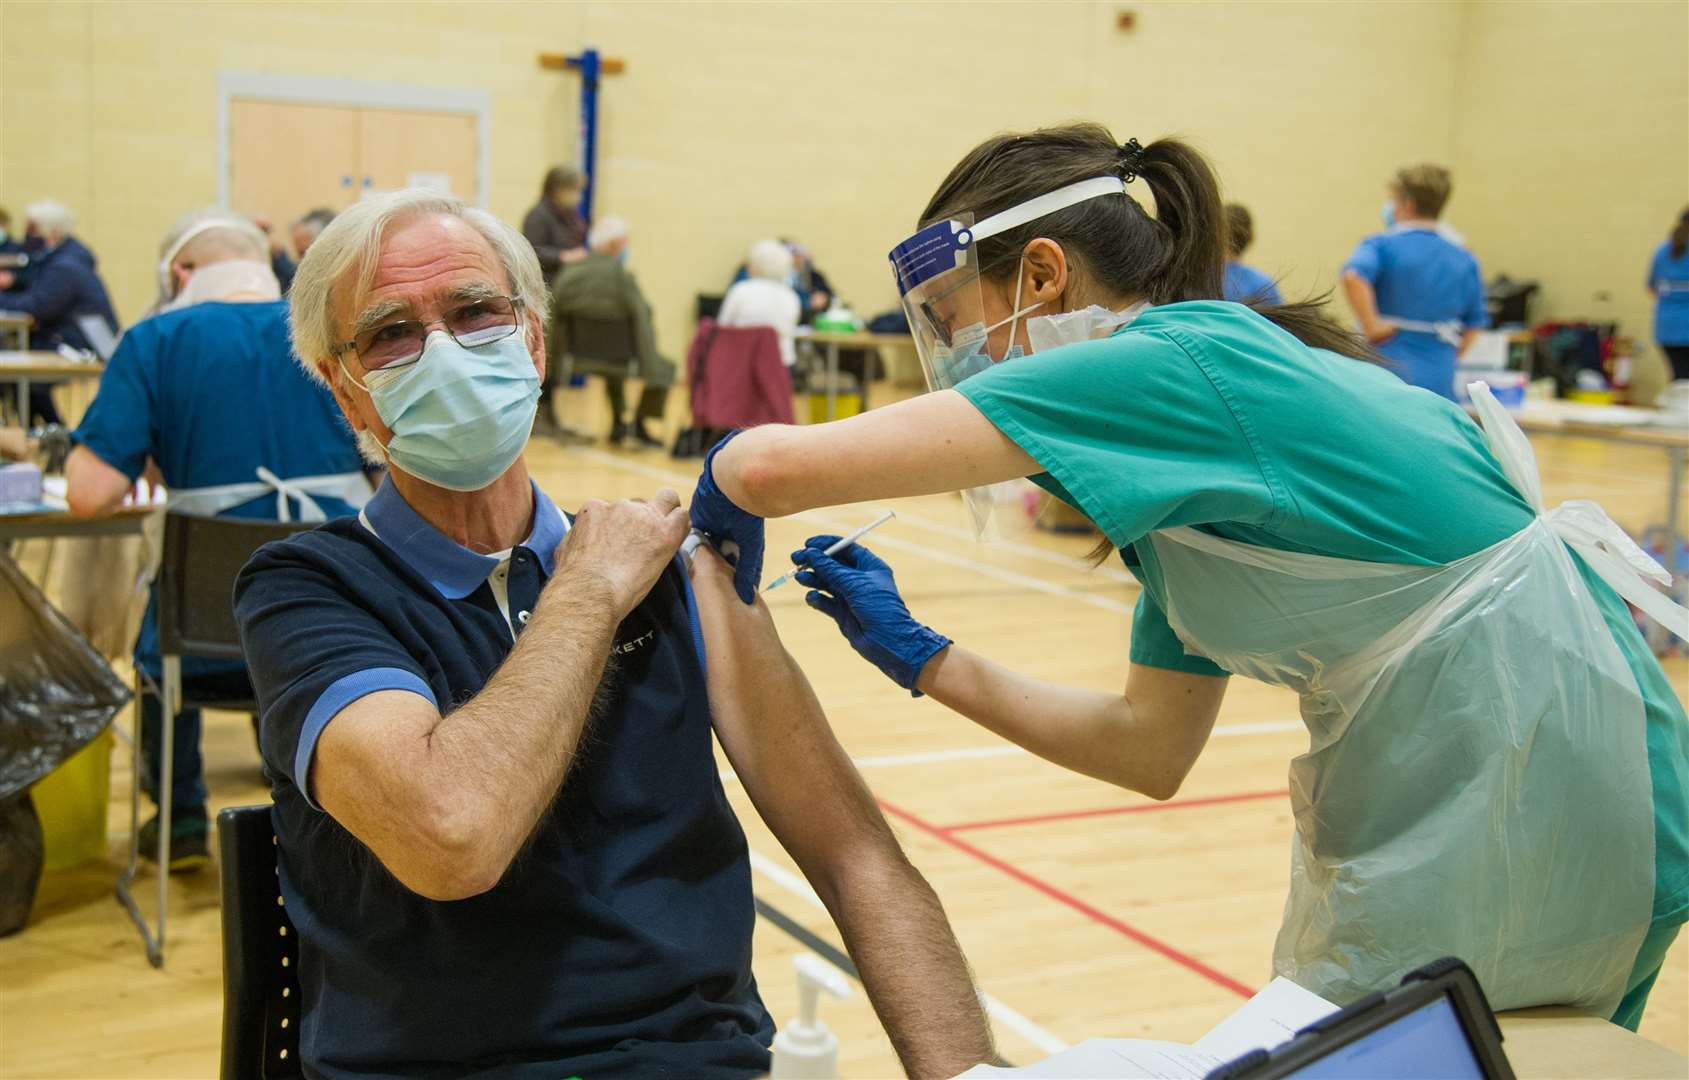 Birthday jab for Dennis Innes as he receives his Covid 19 vaccine from final year medical student Tiffany Martin. Picture: Becky Saunderson